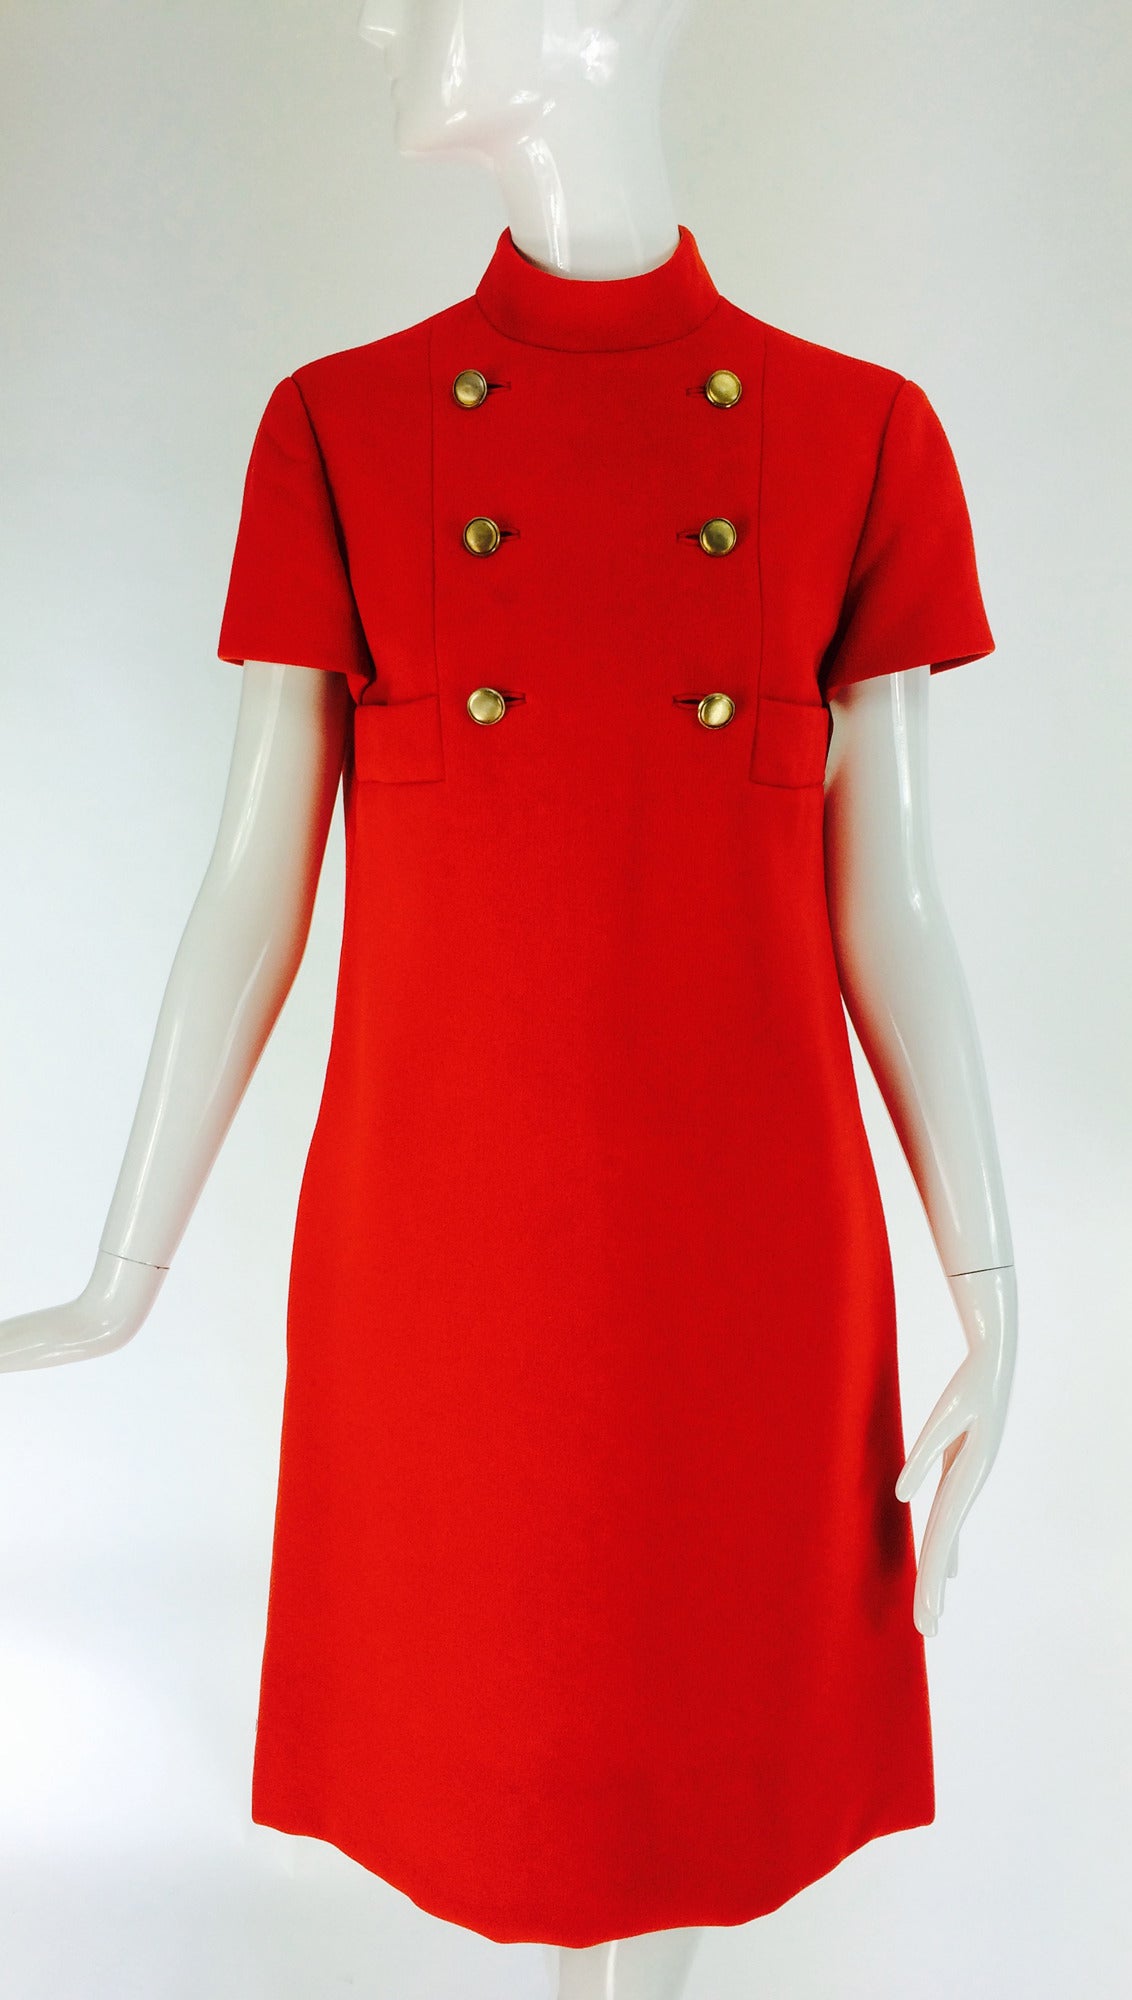 Geoffrey Beene coral red wool crepe mod style shift dress from the 1960s...High banded collar with short sleeves, the fitted A line shape dress has a double row of brass buttons at the bodice front and banded pockets at each side front...Fully lined